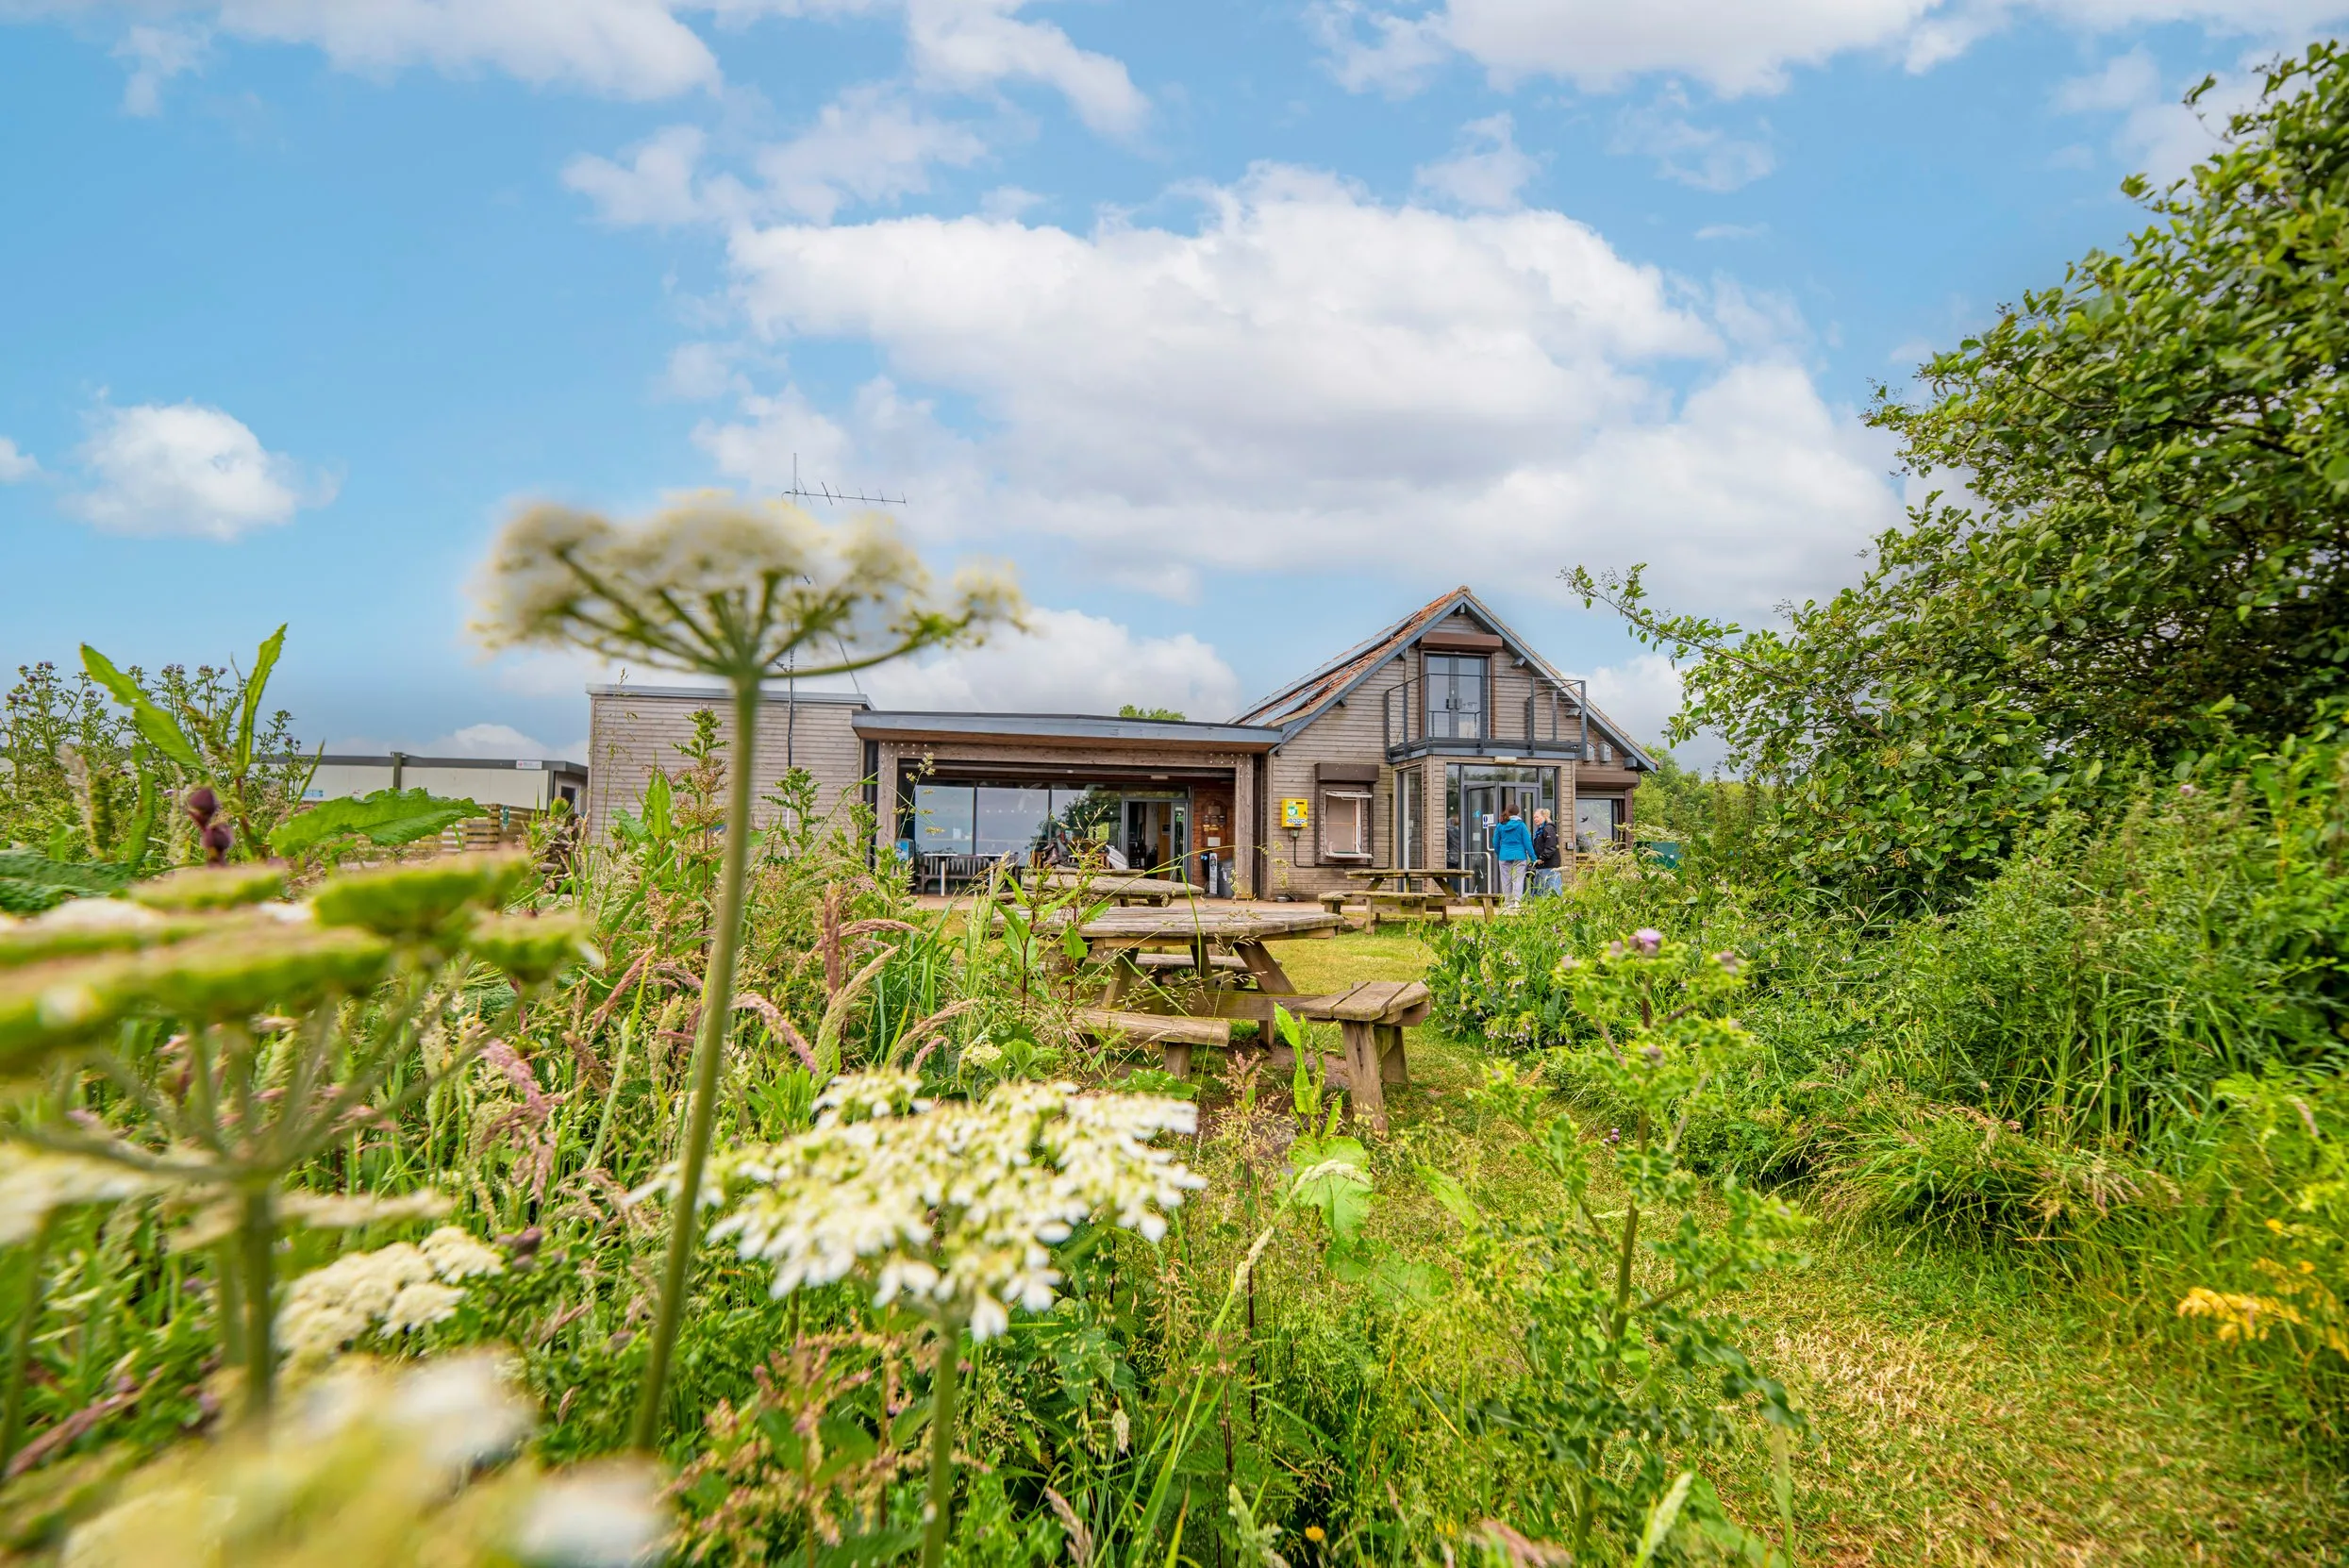 The wooden structure of the visitor centre sits in the background with grassland, flowers and trees of the outside seating area sit in the foreground of Bempton Cliffs.